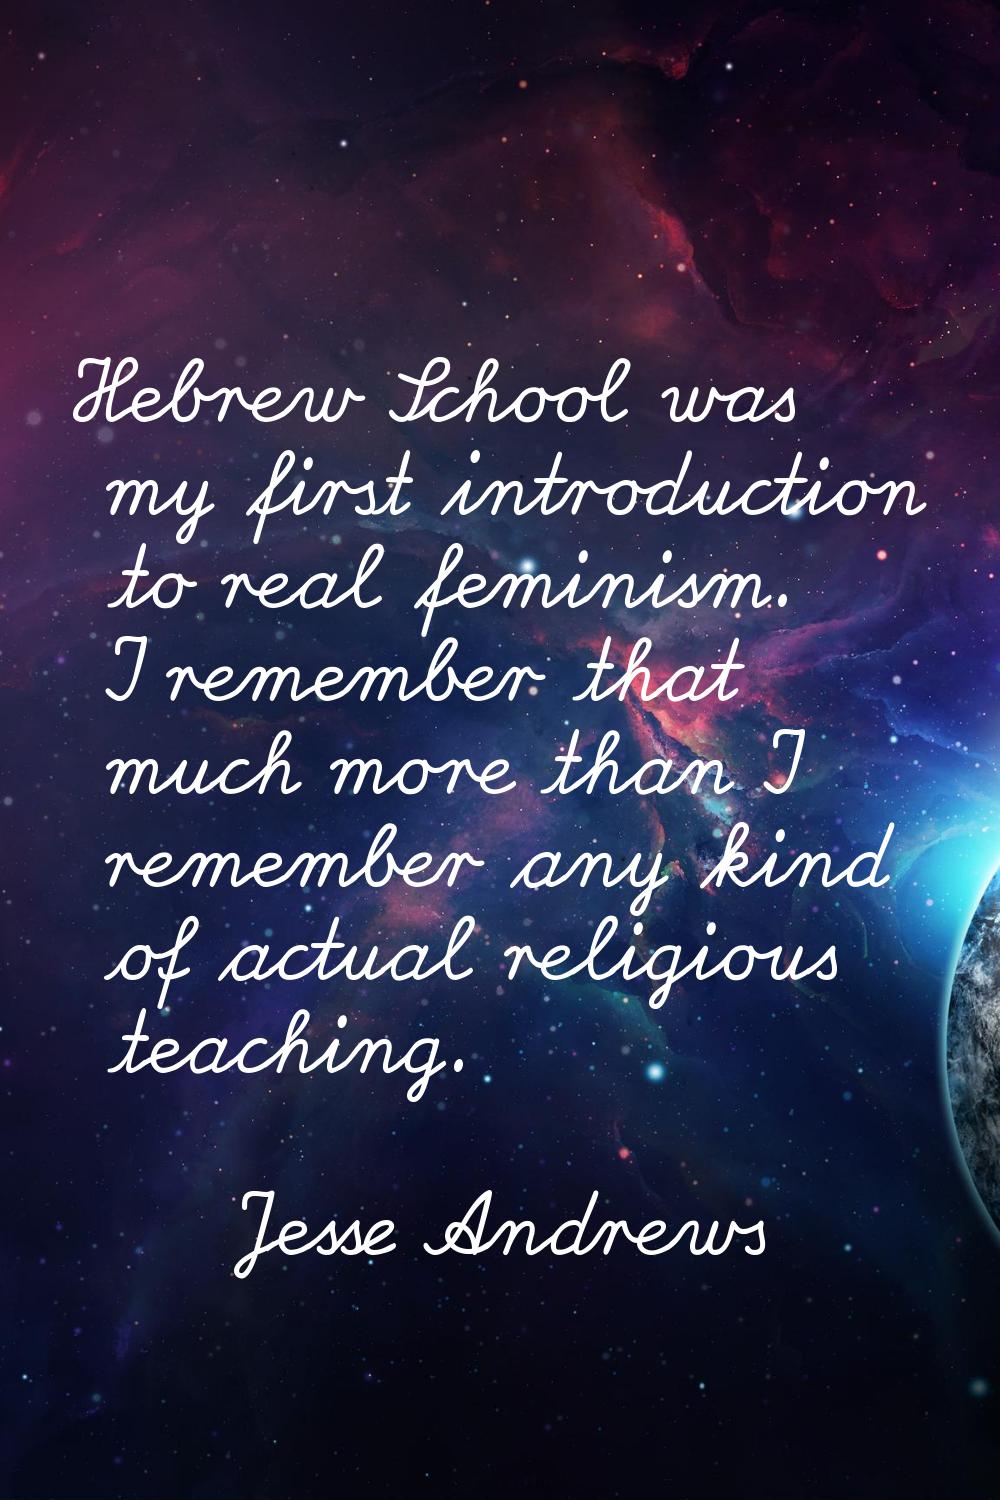 Hebrew School was my first introduction to real feminism. I remember that much more than I remember